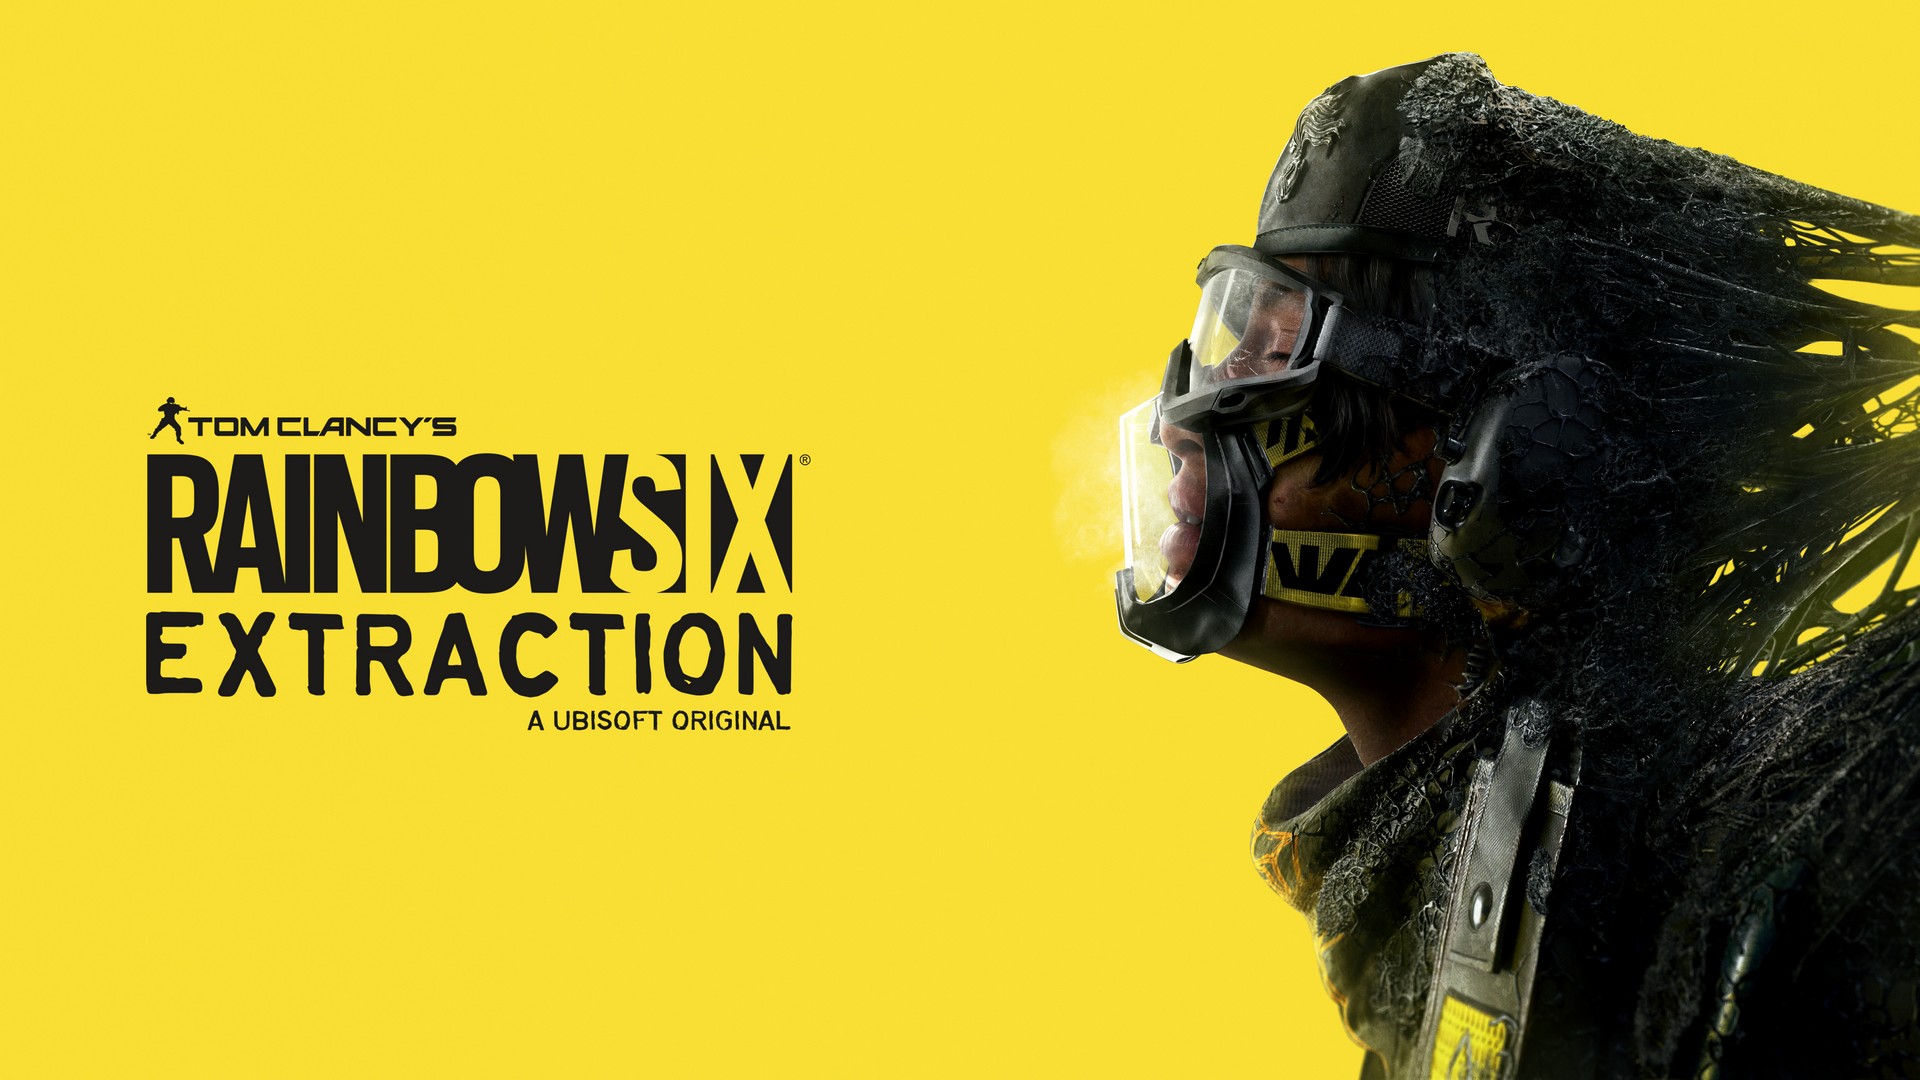 Tom Clancy’s Rainbow Six Extraction Debuts World Trailer at PlayStation Showcase 2021